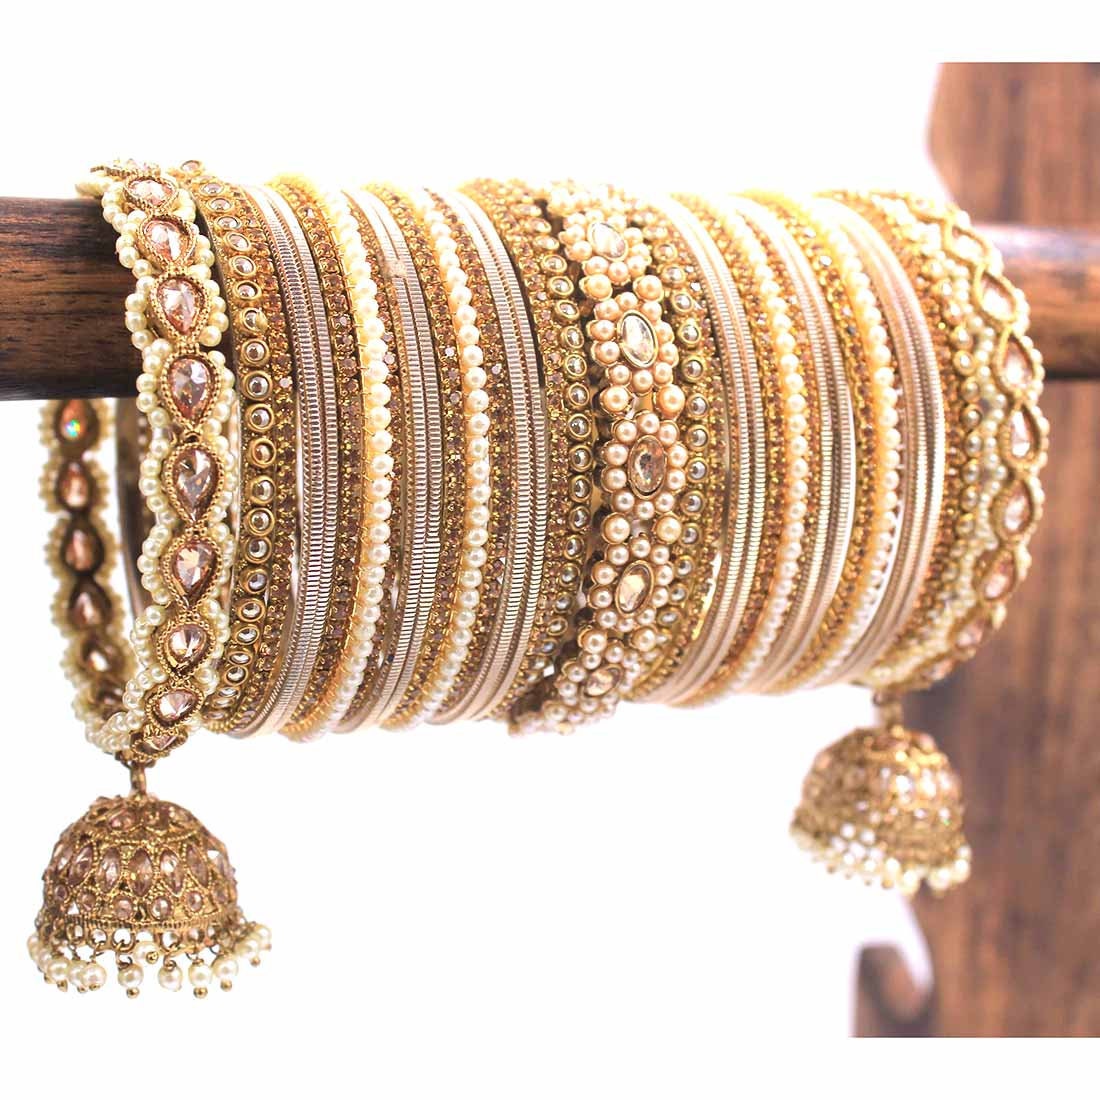 How to Select the Right Indian Gold Bangle for a Party